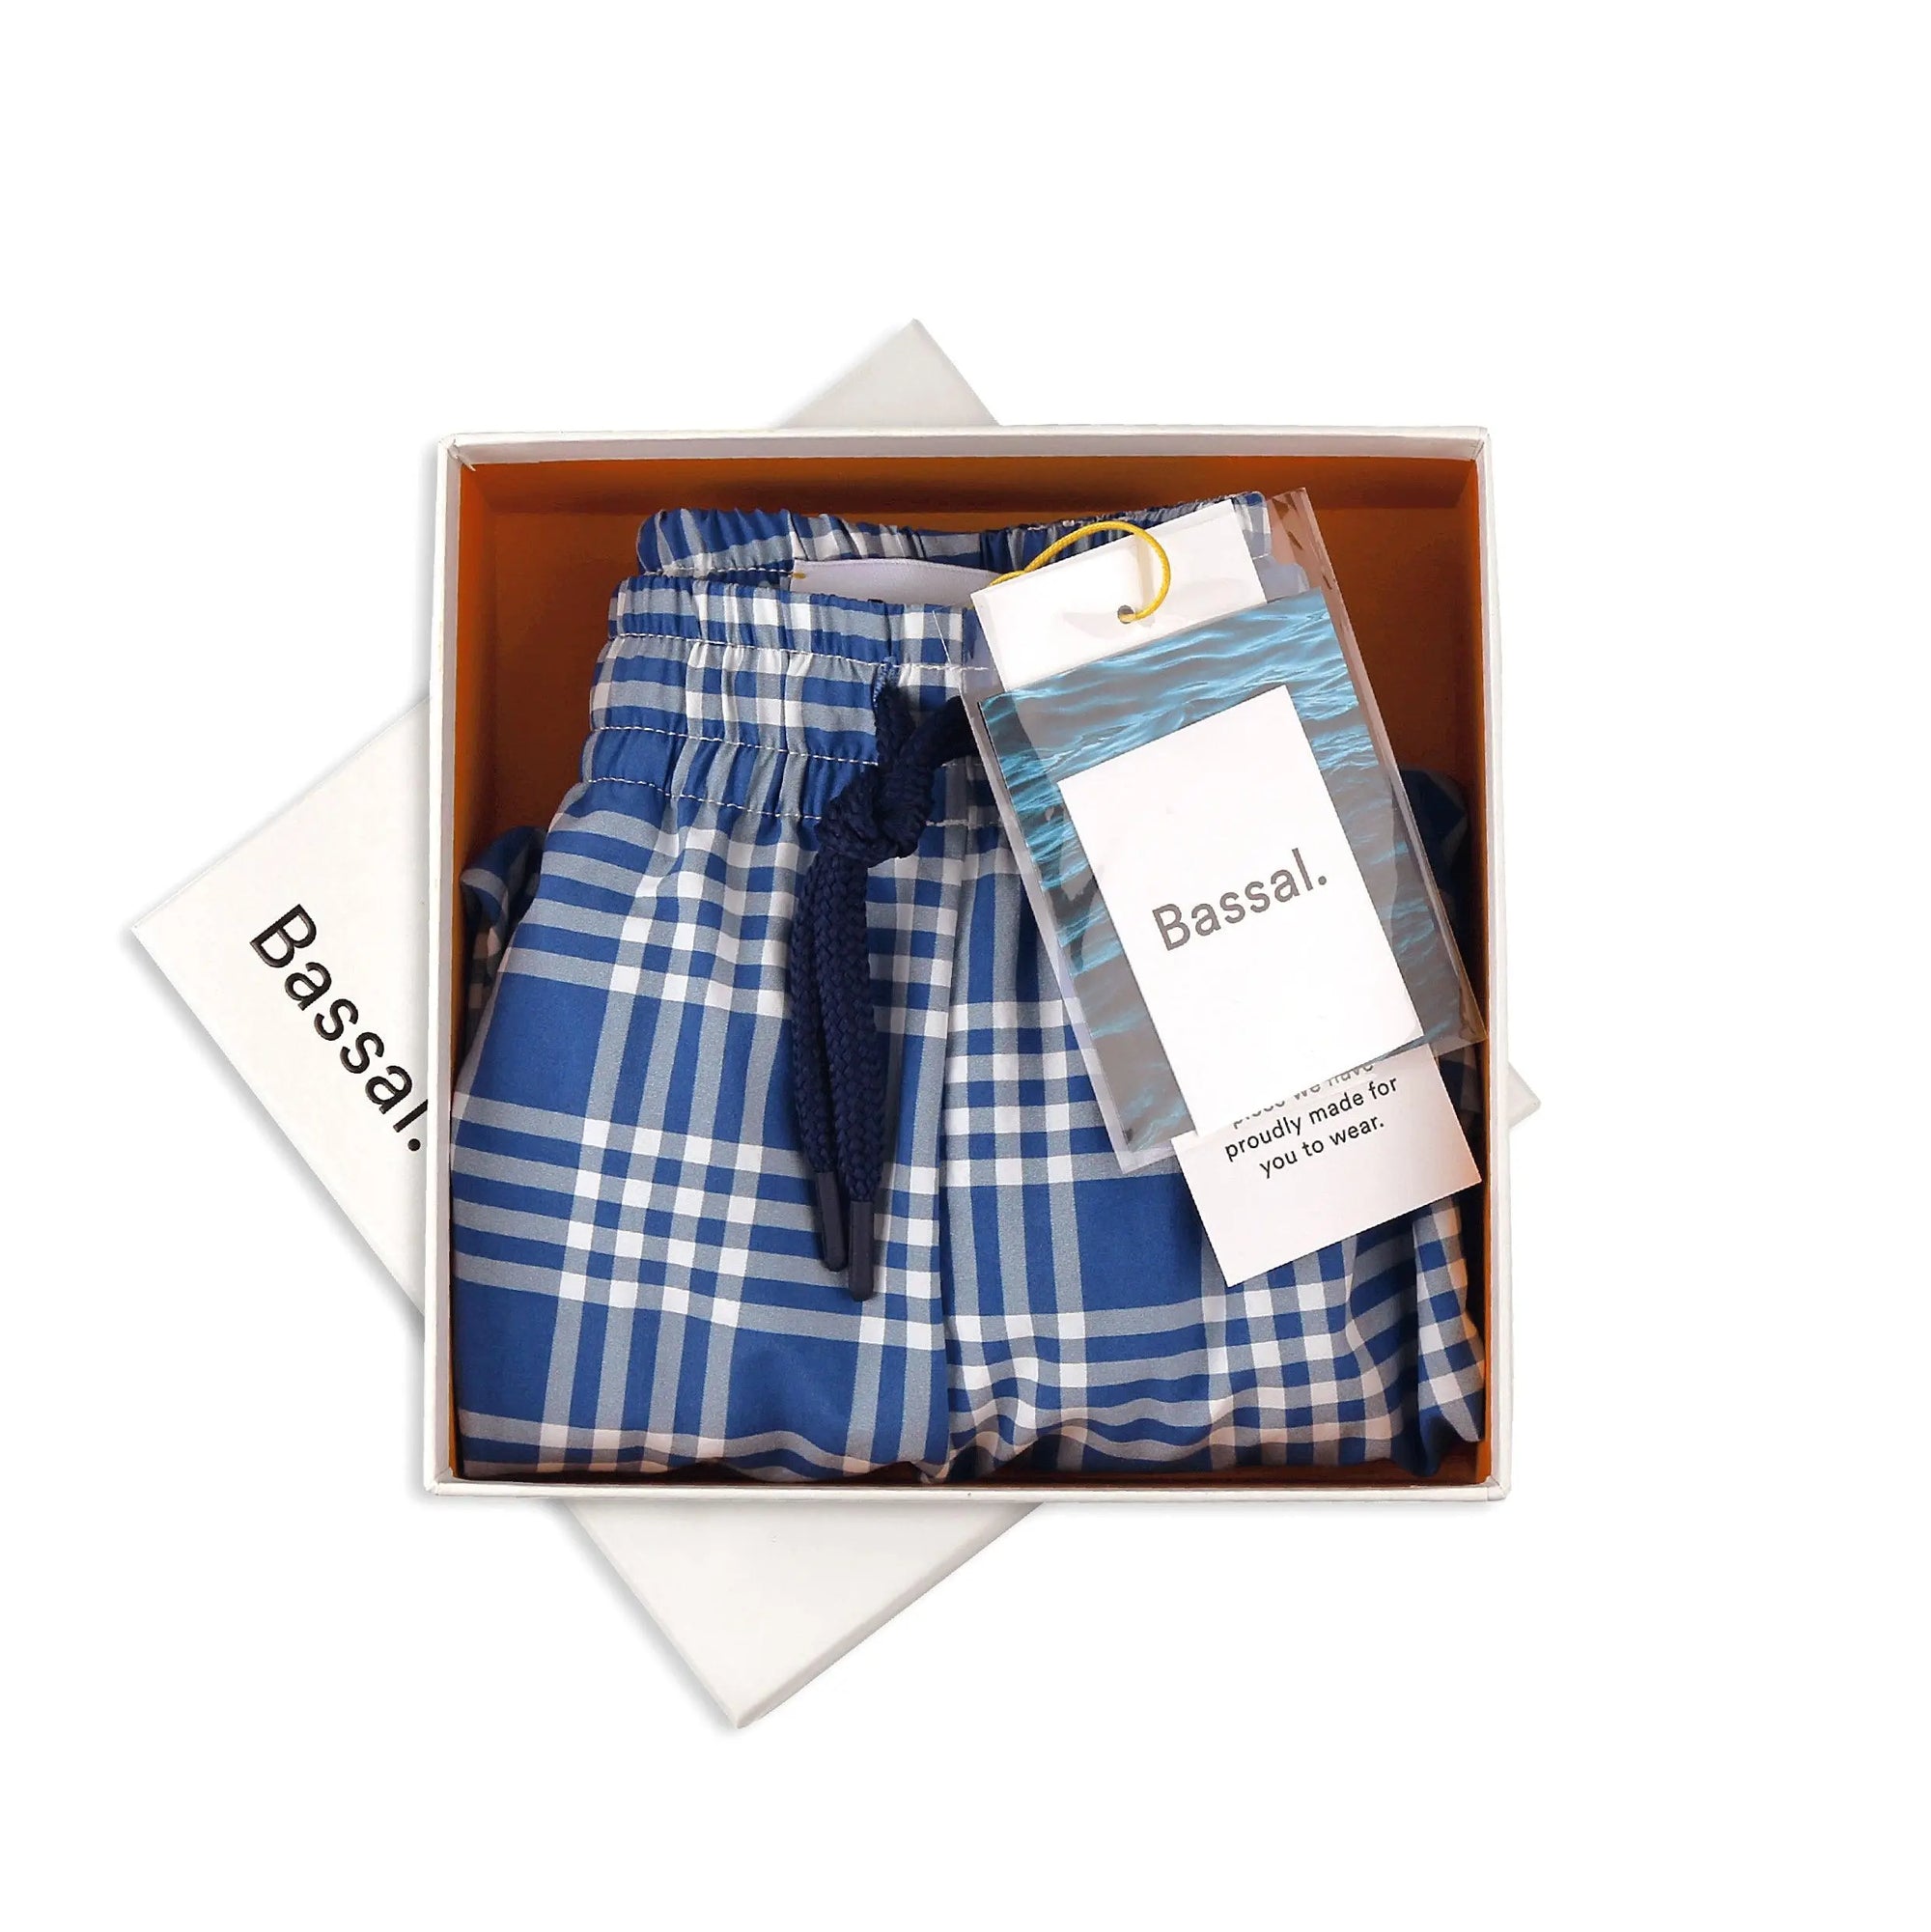 A pair of blue and white plaid Cuatro Swimwear with an elastic waistband and navy drawstring is neatly folded inside an open Bassal. box. A clear plastic tag attached to the swimwear reads "Bassal. proudly made for you to wear." Discover them at our flagship store in Barcelona or bassalstore online.